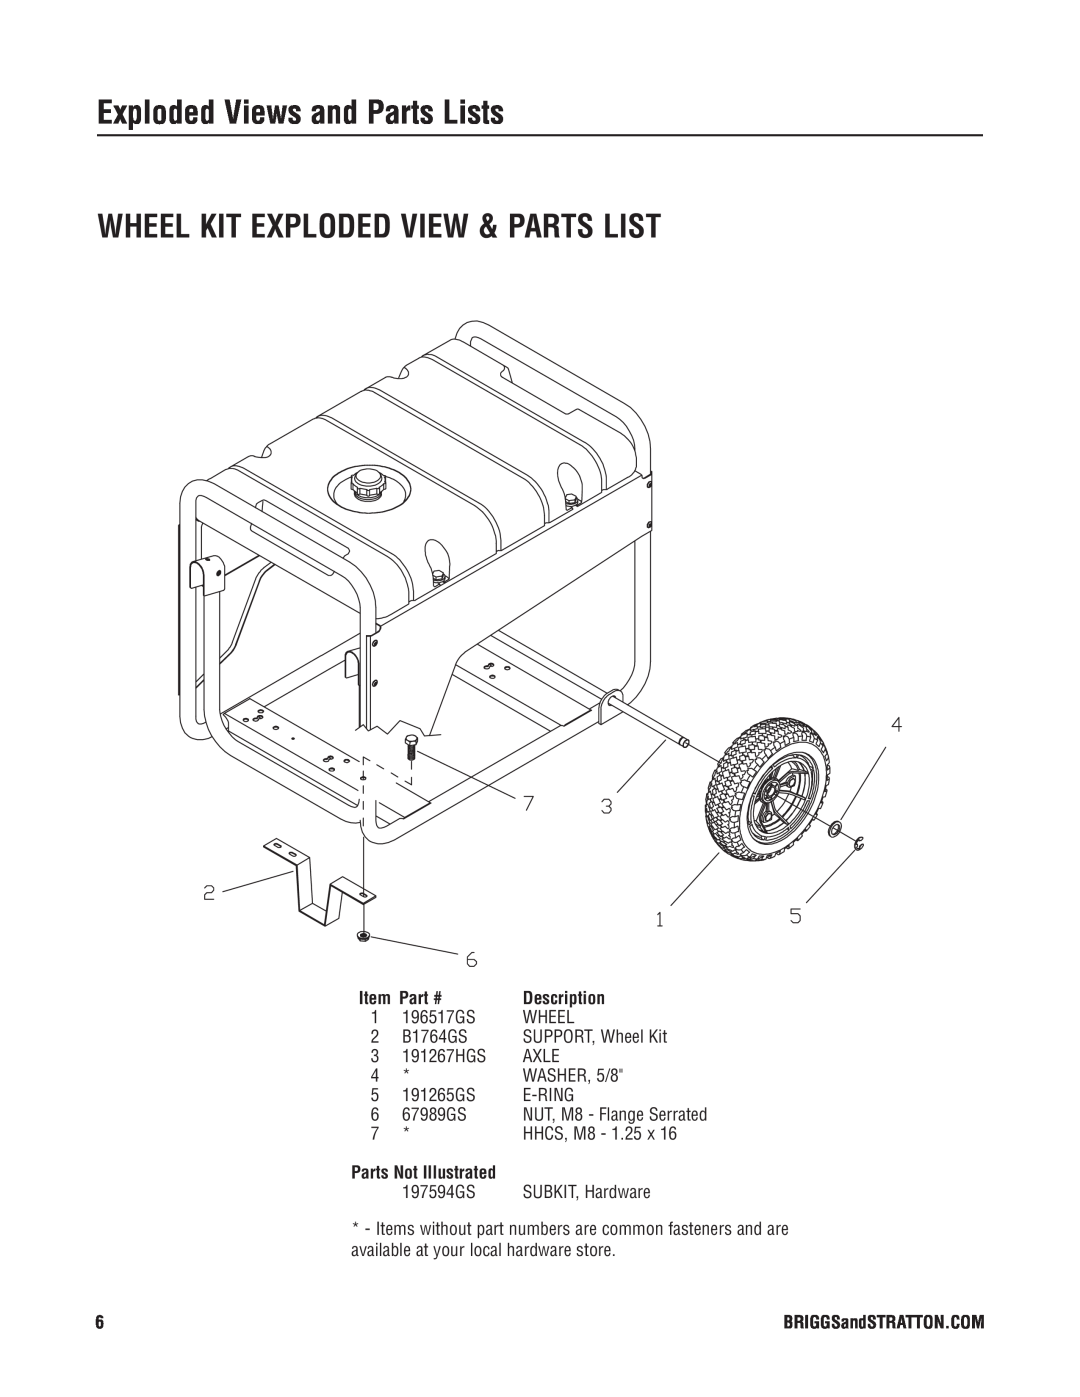 Briggs & Stratton 030380 manual Wheel Kit Exploded View & Parts List, Exploded Views and Parts Lists, Description 